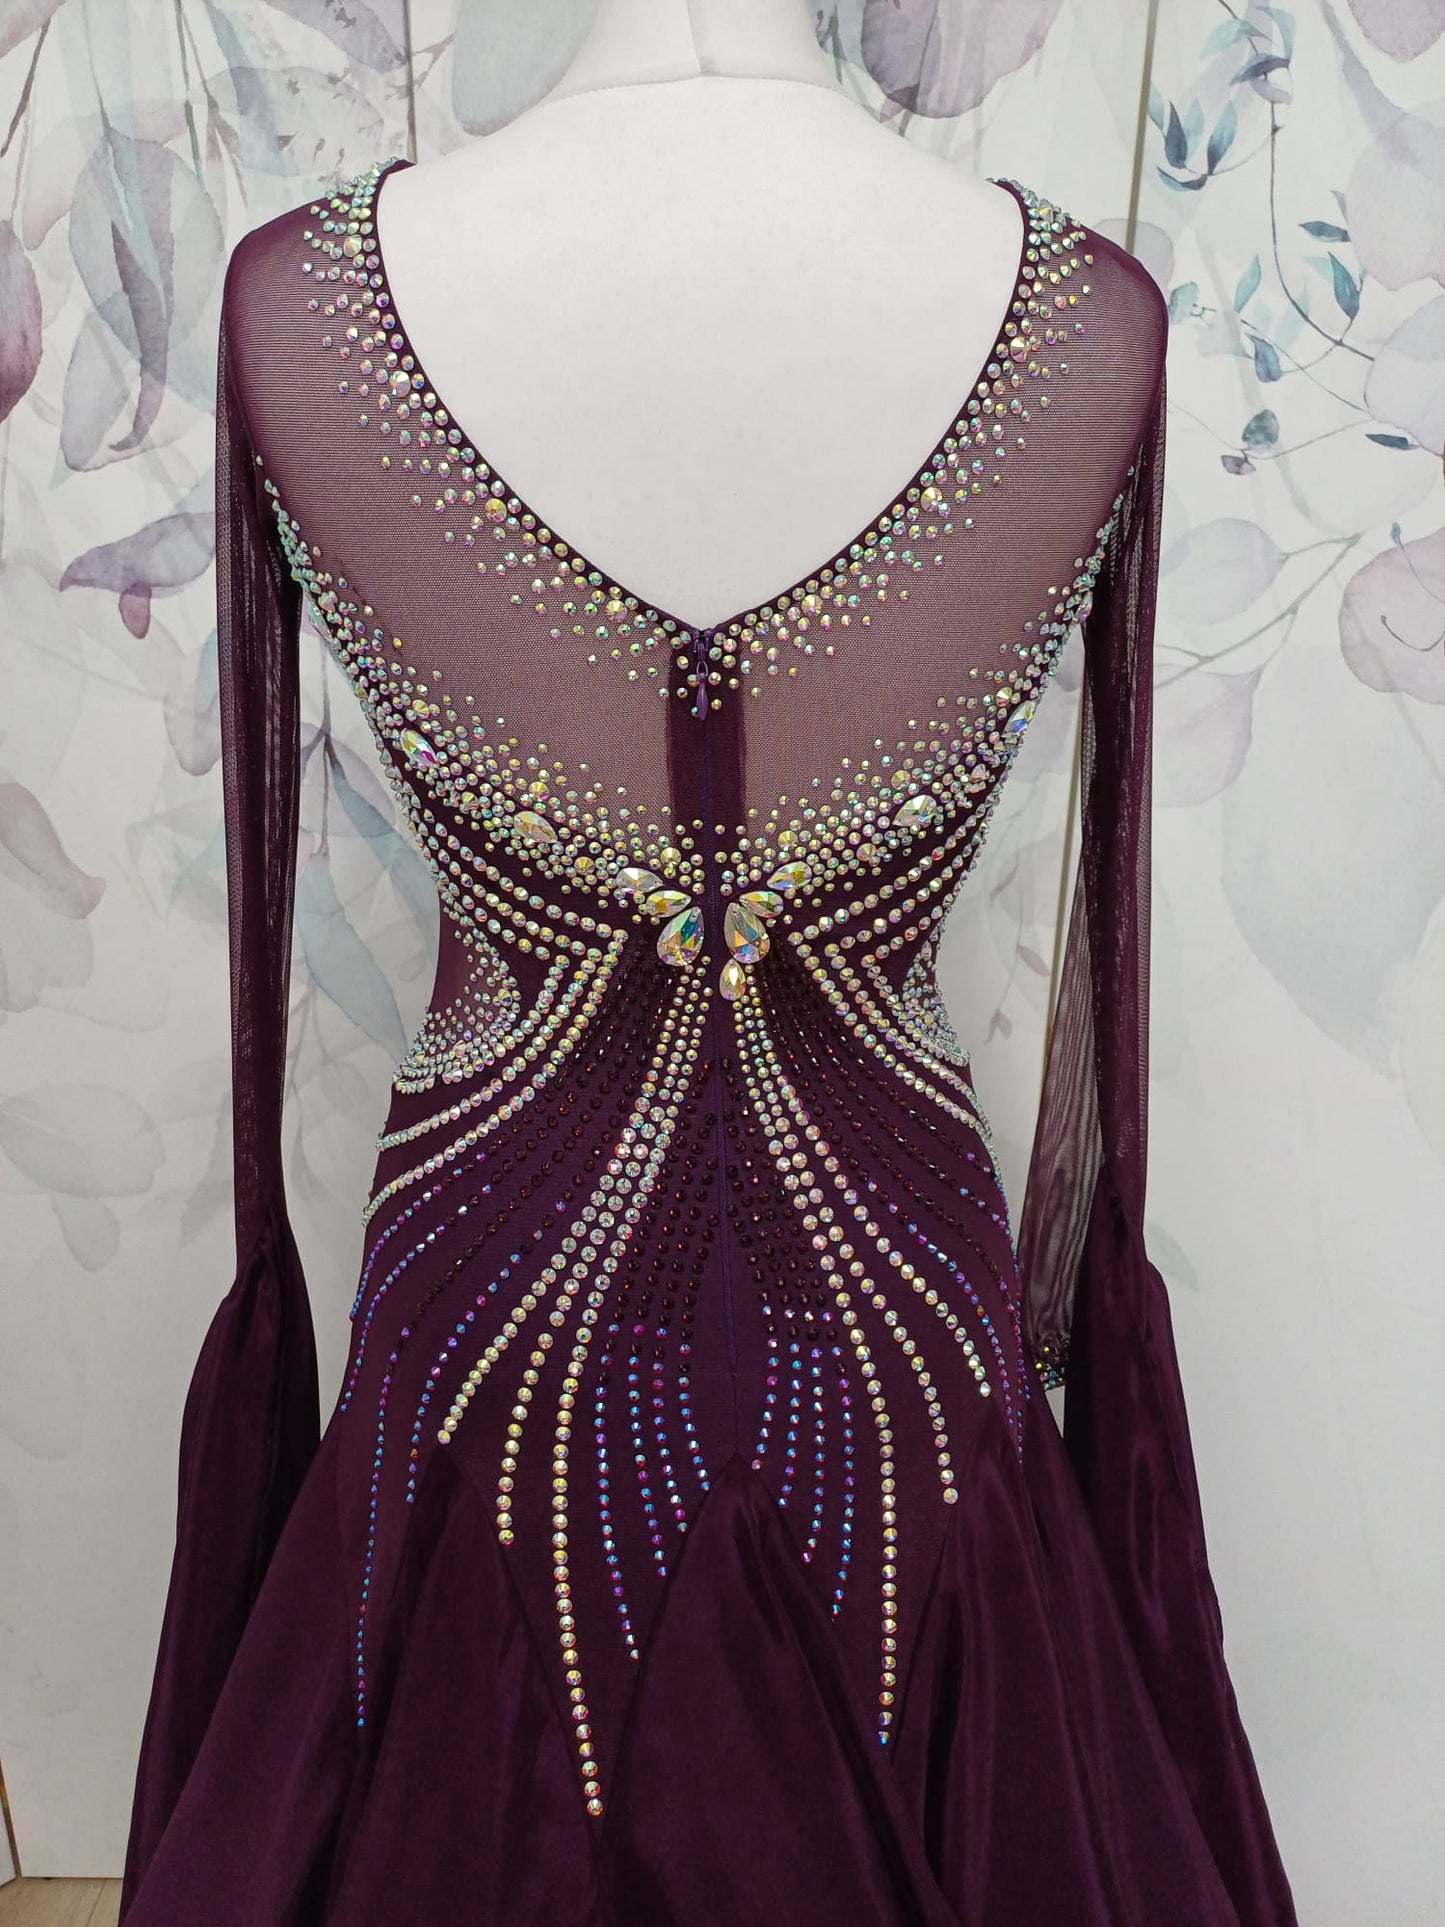 014 Plum Ballroom Dance Dress. Stoned in AB with detachable floats. Plum mesh side panel detailing.